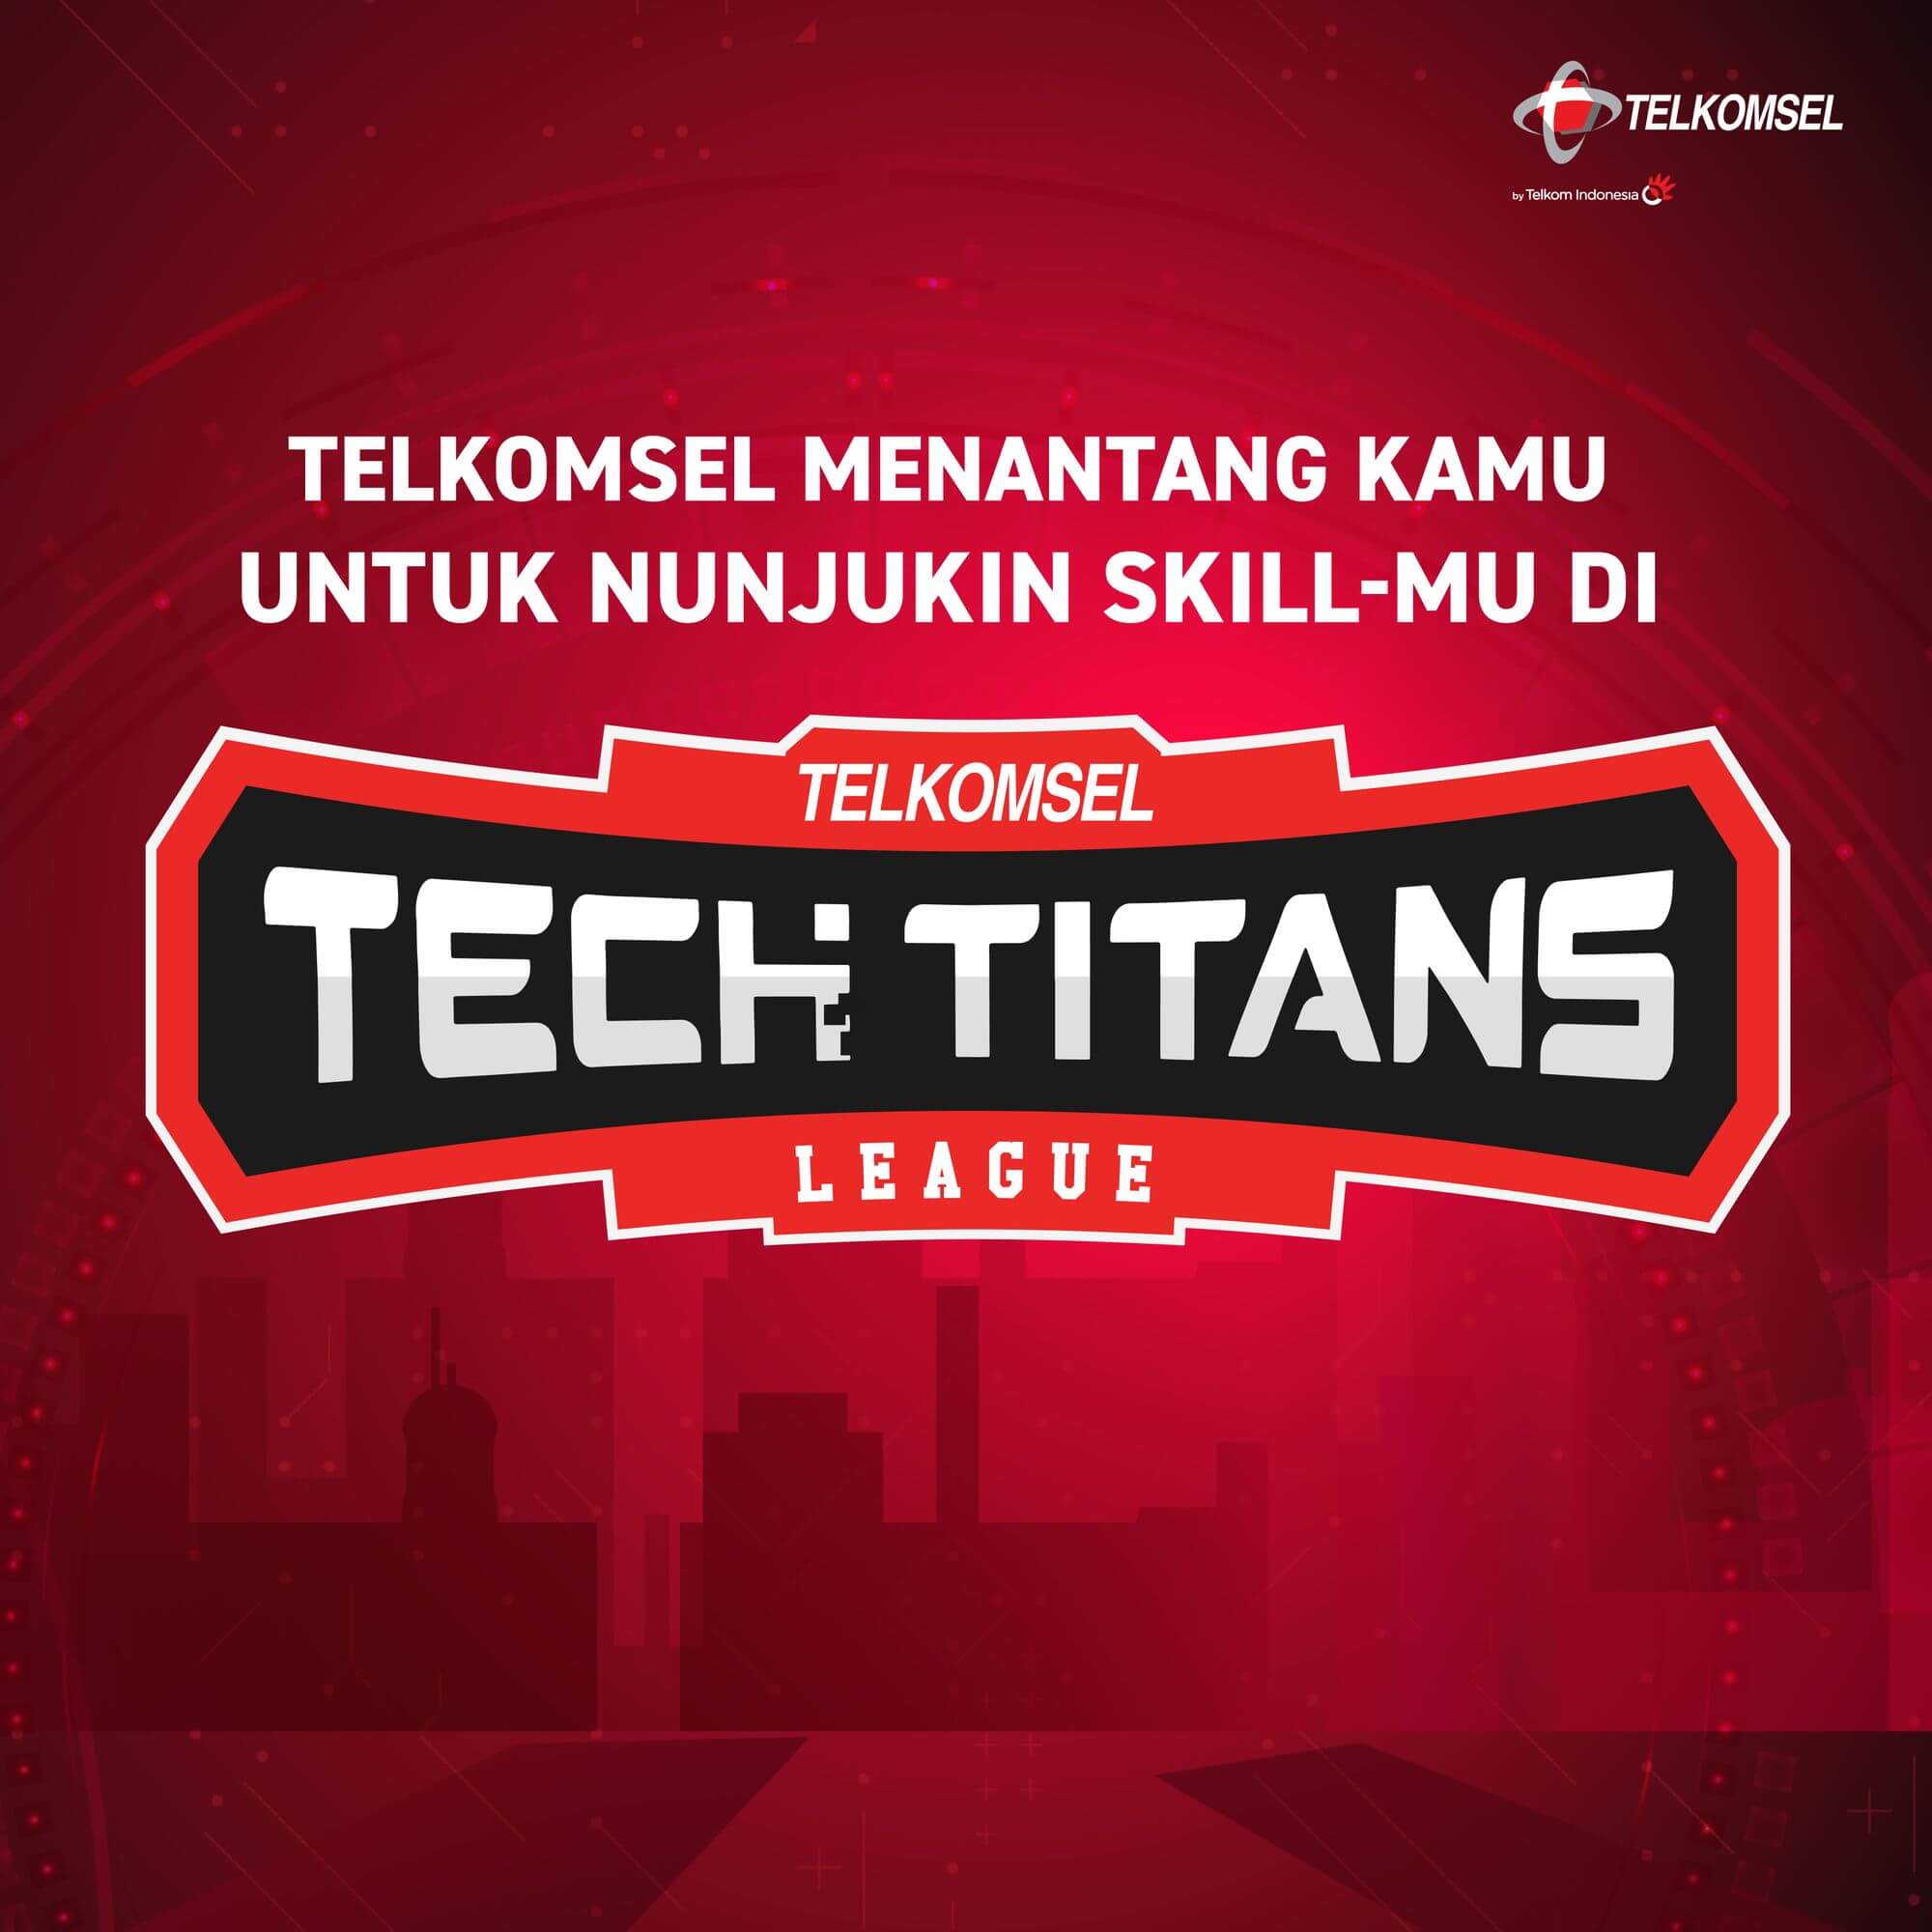 build-a-tech-savvy-environment-heres-how-telkomsel-creates-an-opportunity-for-tech-talents-in-indonesia